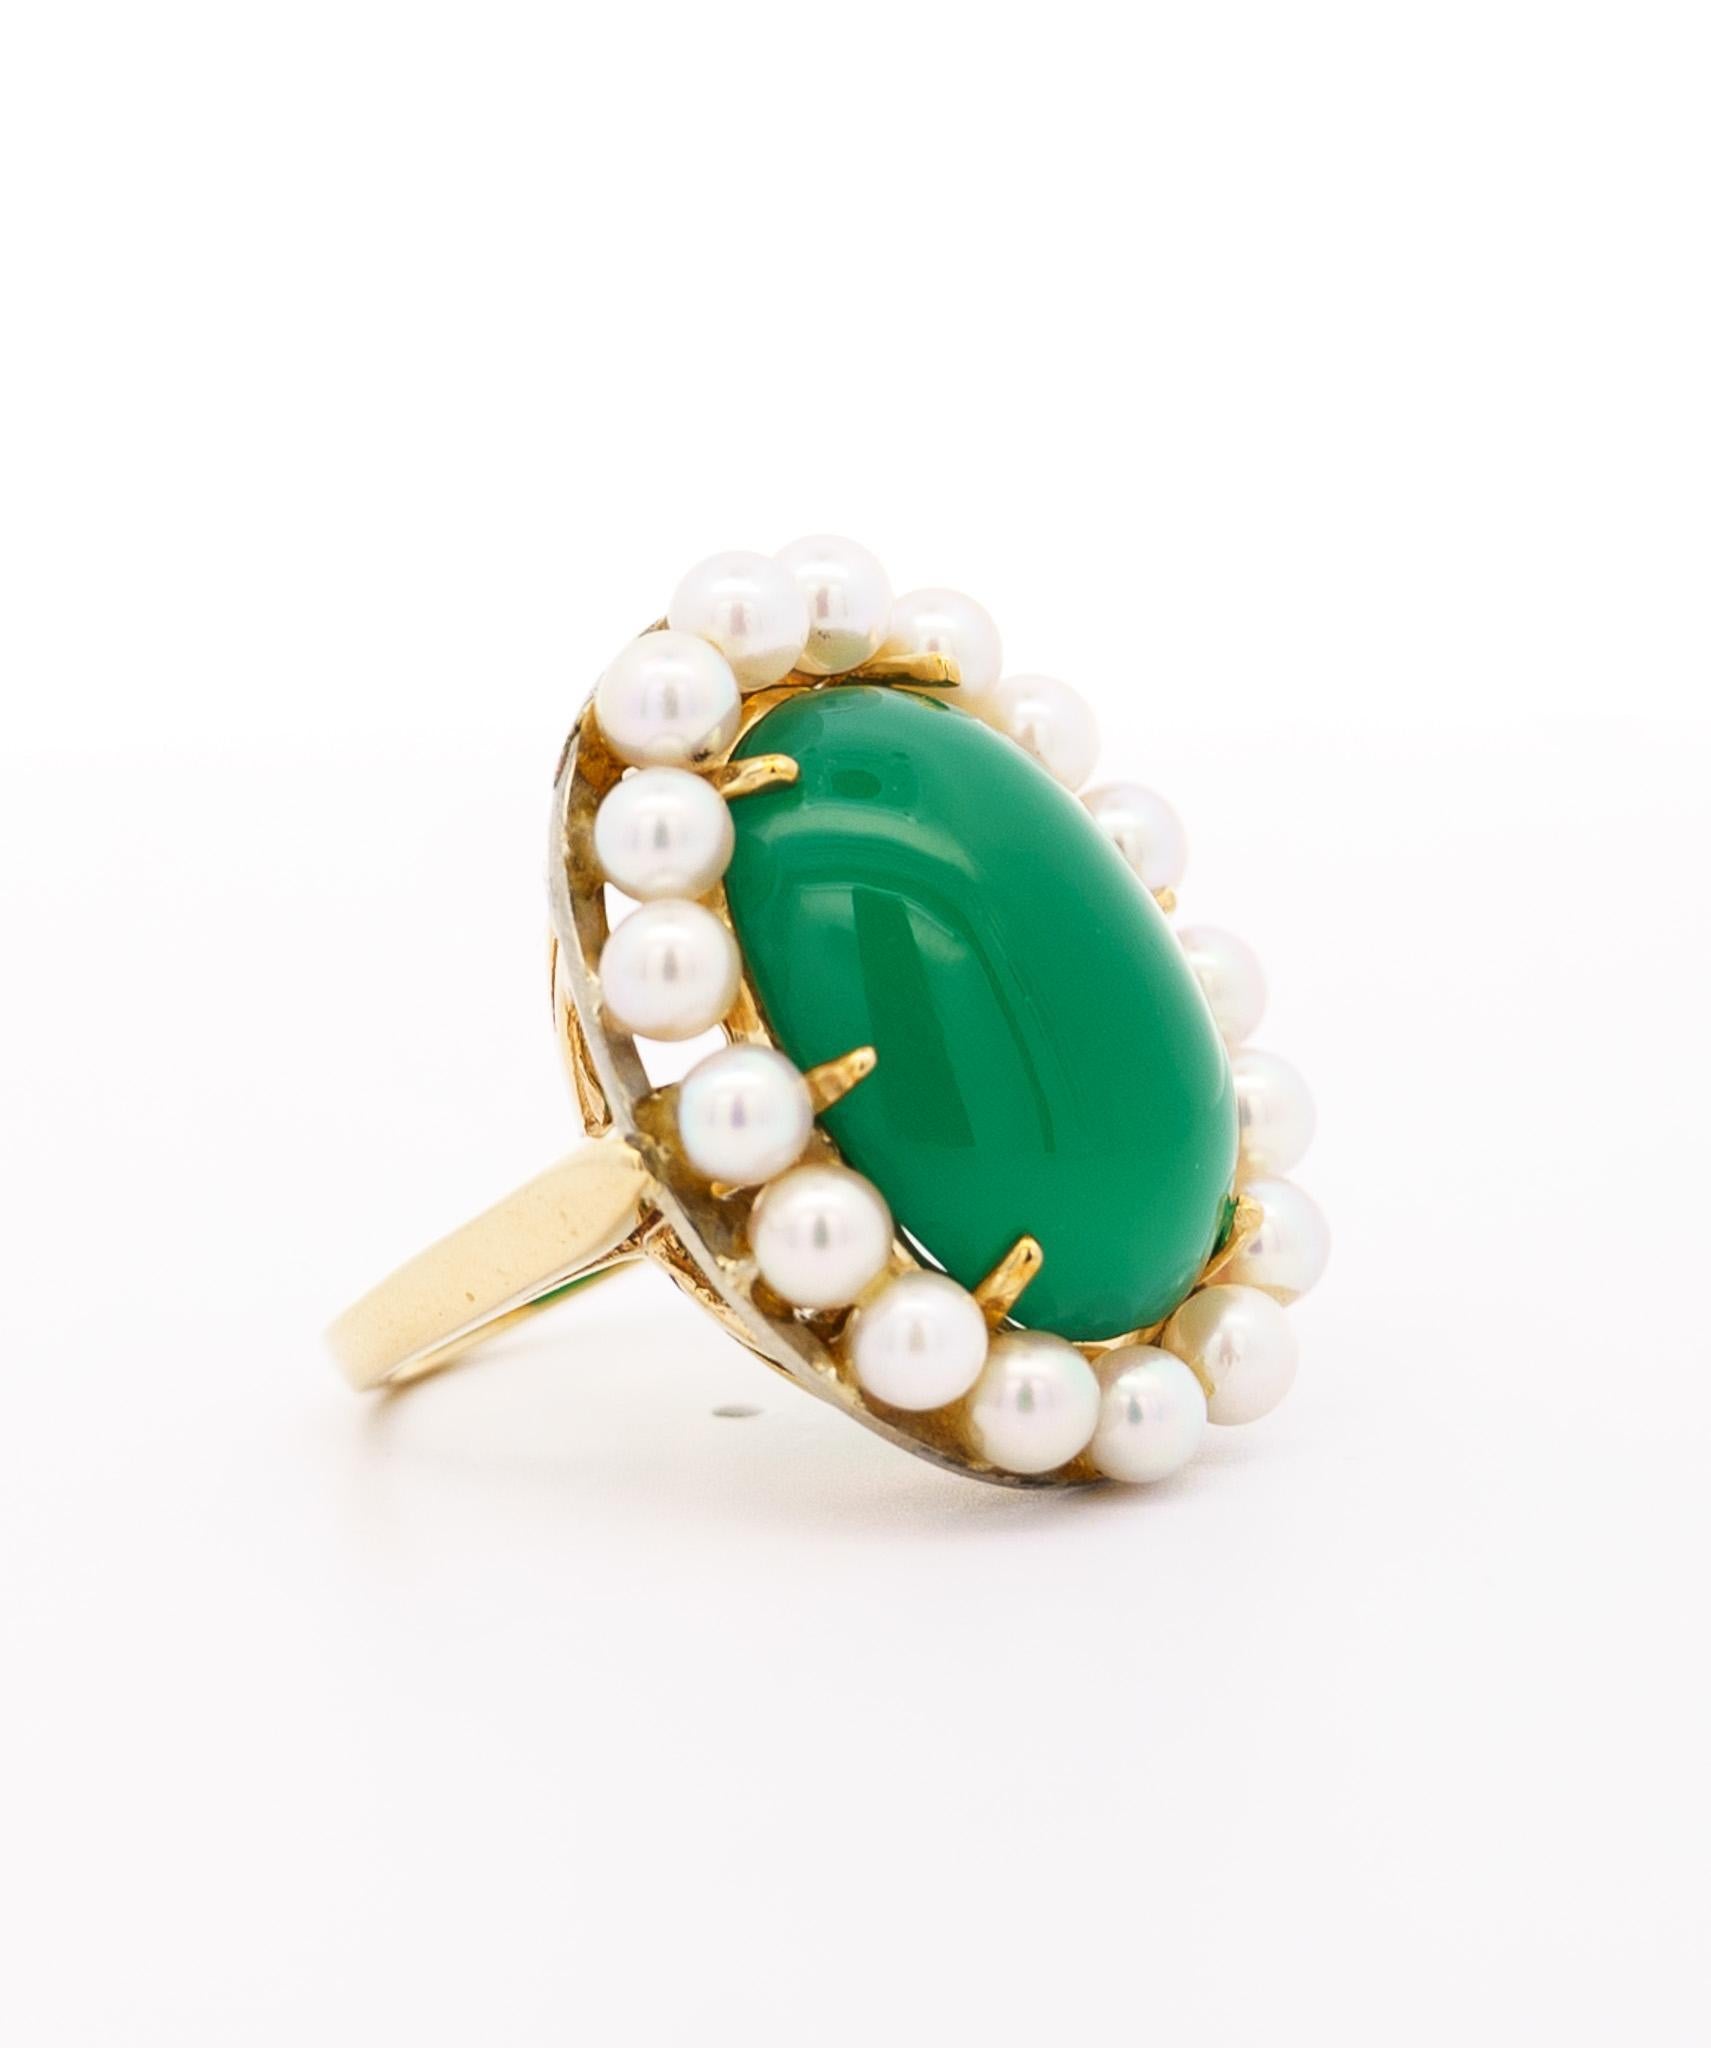 14K Yellow Gold 12 Carat Chalcedony Quartz and Pearl Halo Ring - Size 6

Elevate your jewelry collection with this stunning 14K yellow gold halo ring, boasting a captivating 12-carat Chalcedony Quartz centerpiece encircled by a delicate pearl halo.